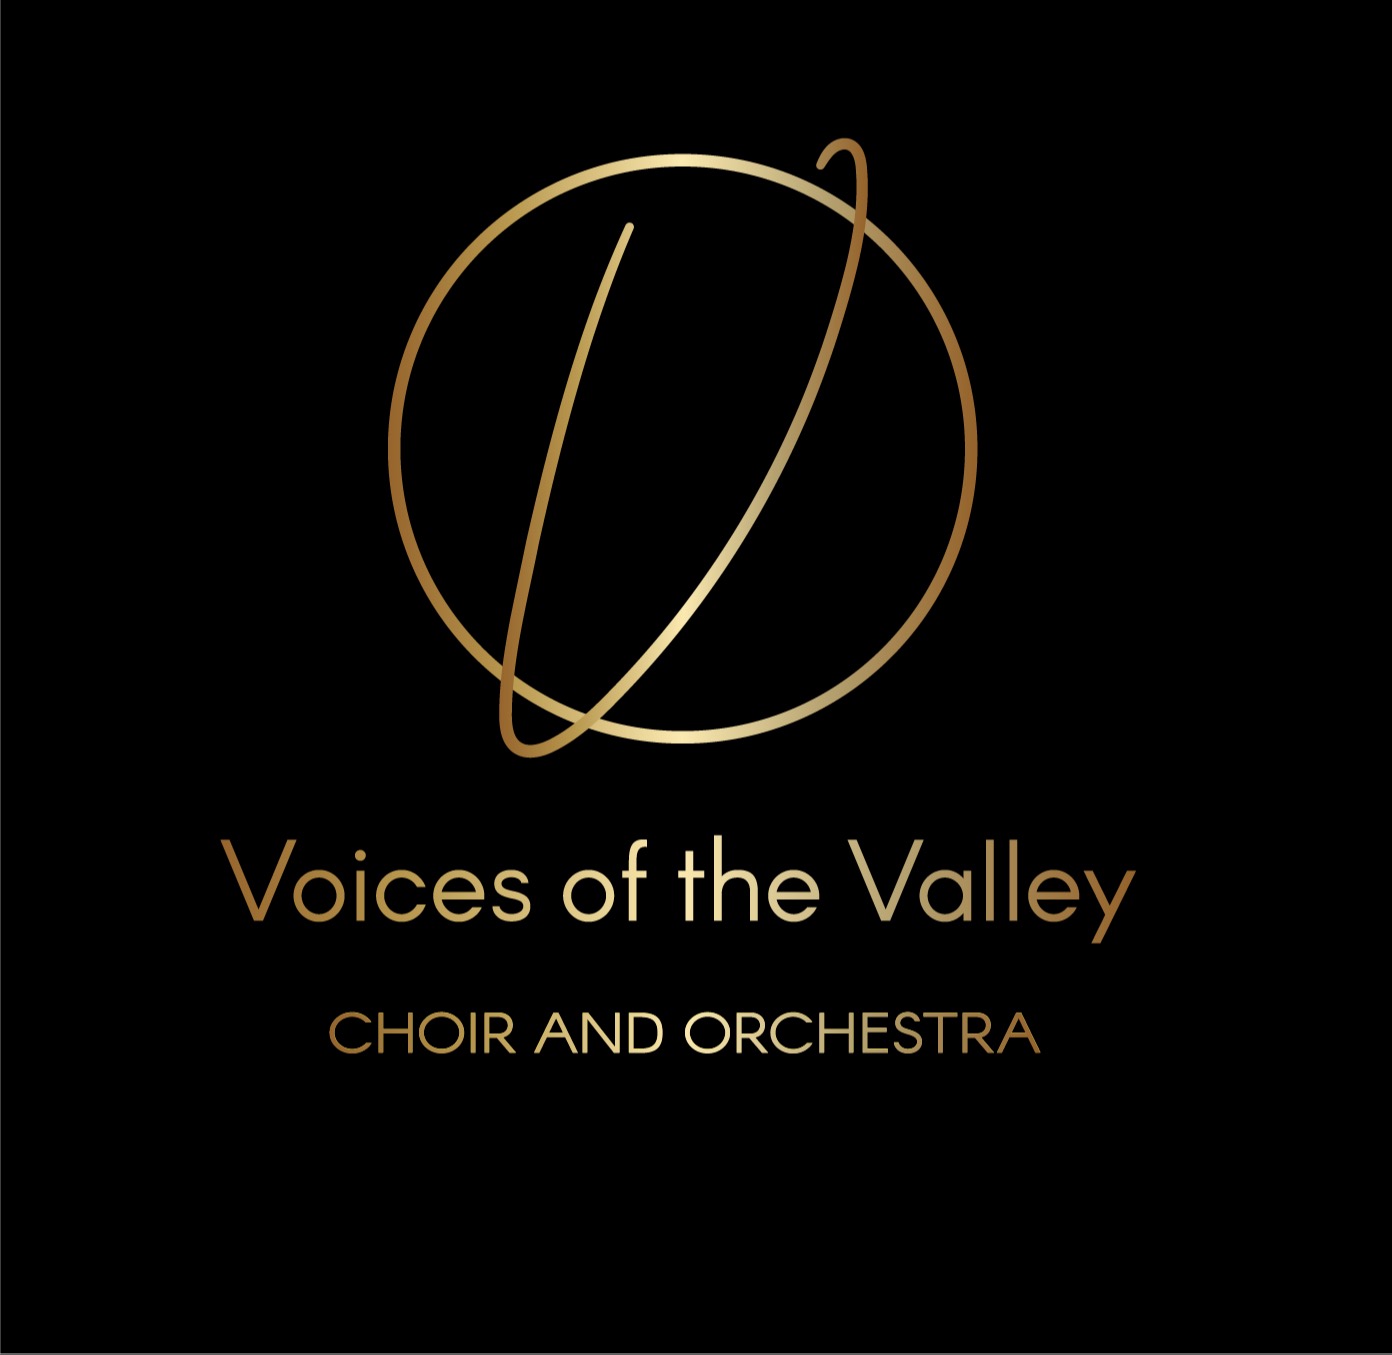 Voices of the Valley Choir and Orchestra logo